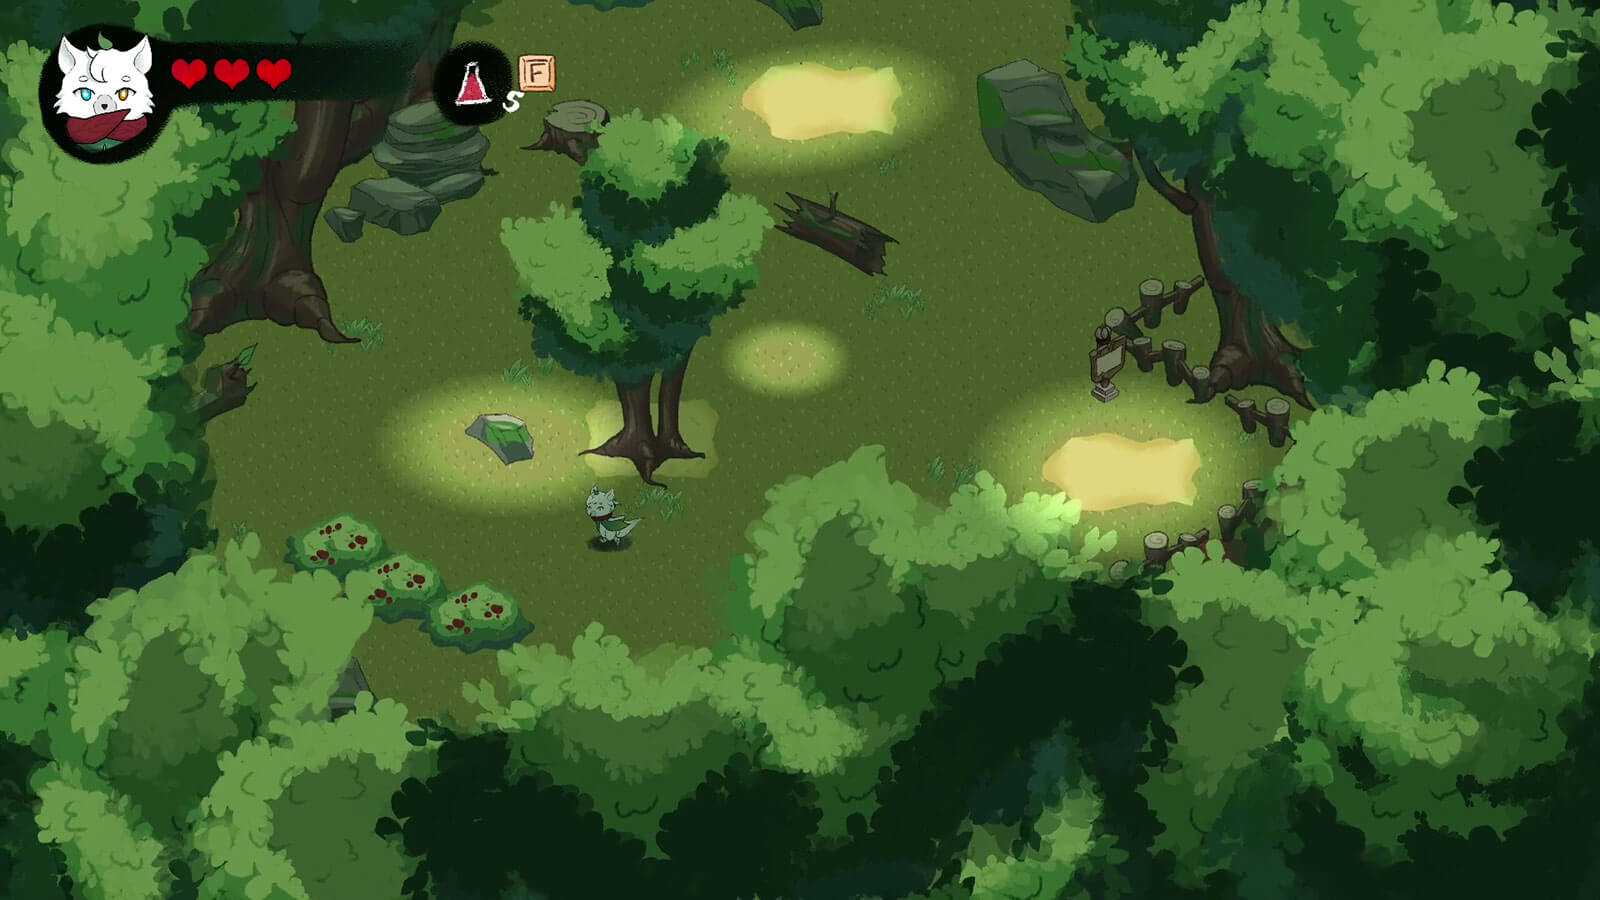 Isometric view of a character exploring a lush green forest